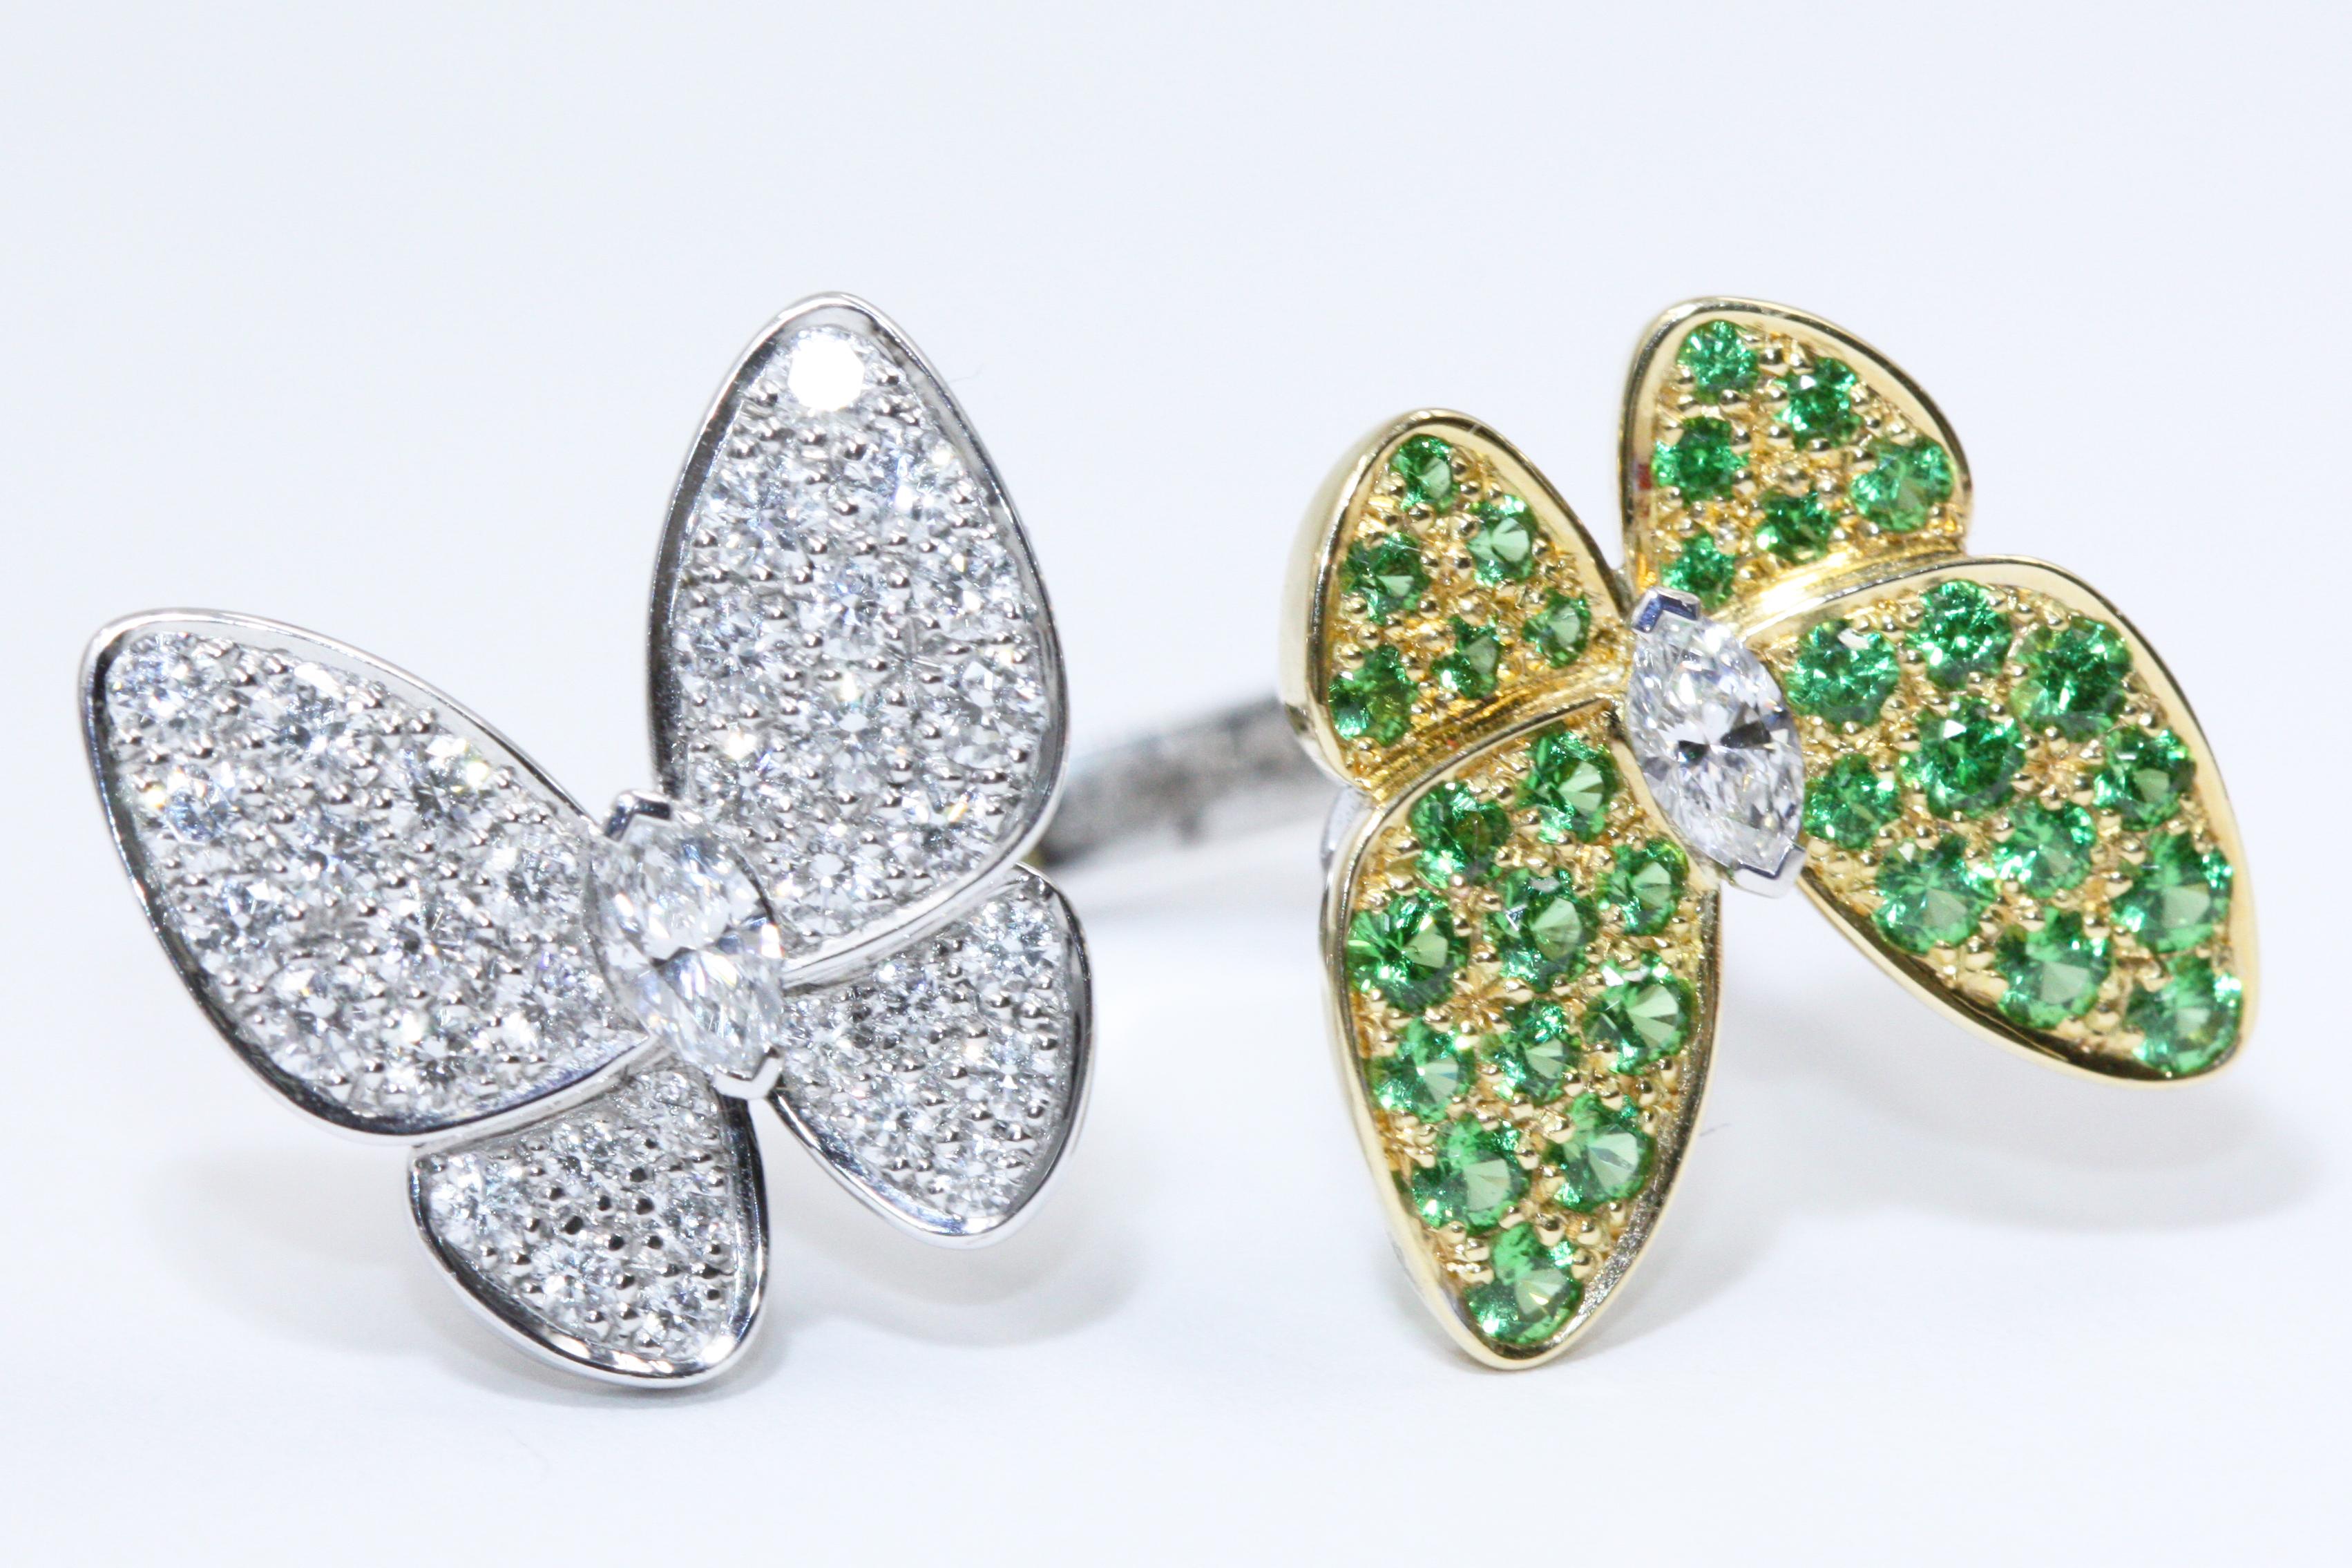 
What is more beautiful than looking at a butterfly on a flower?
This is what the famous brand Van Cleef & Arpels wants to show the world, nature is beautiful.
This ring of yellow and white gold, with white and green diamonds, represents the beauty